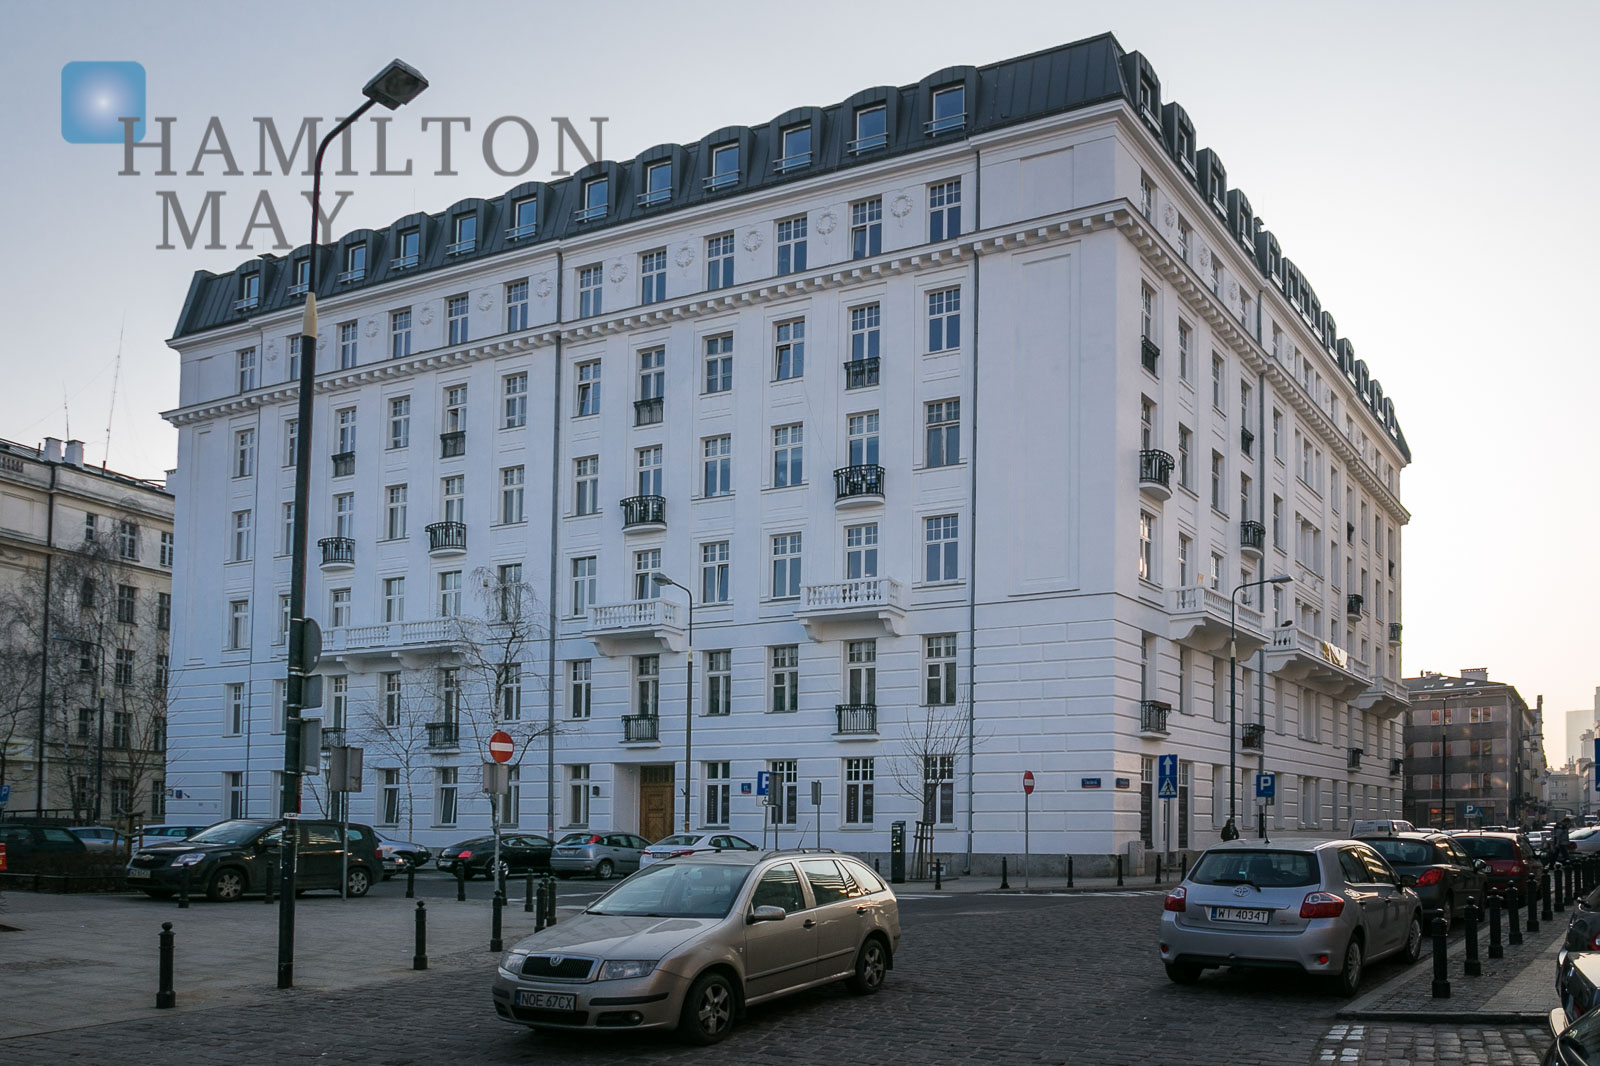 Luxurious apartments in neoclassical townhouse nearby Nowy Świat street